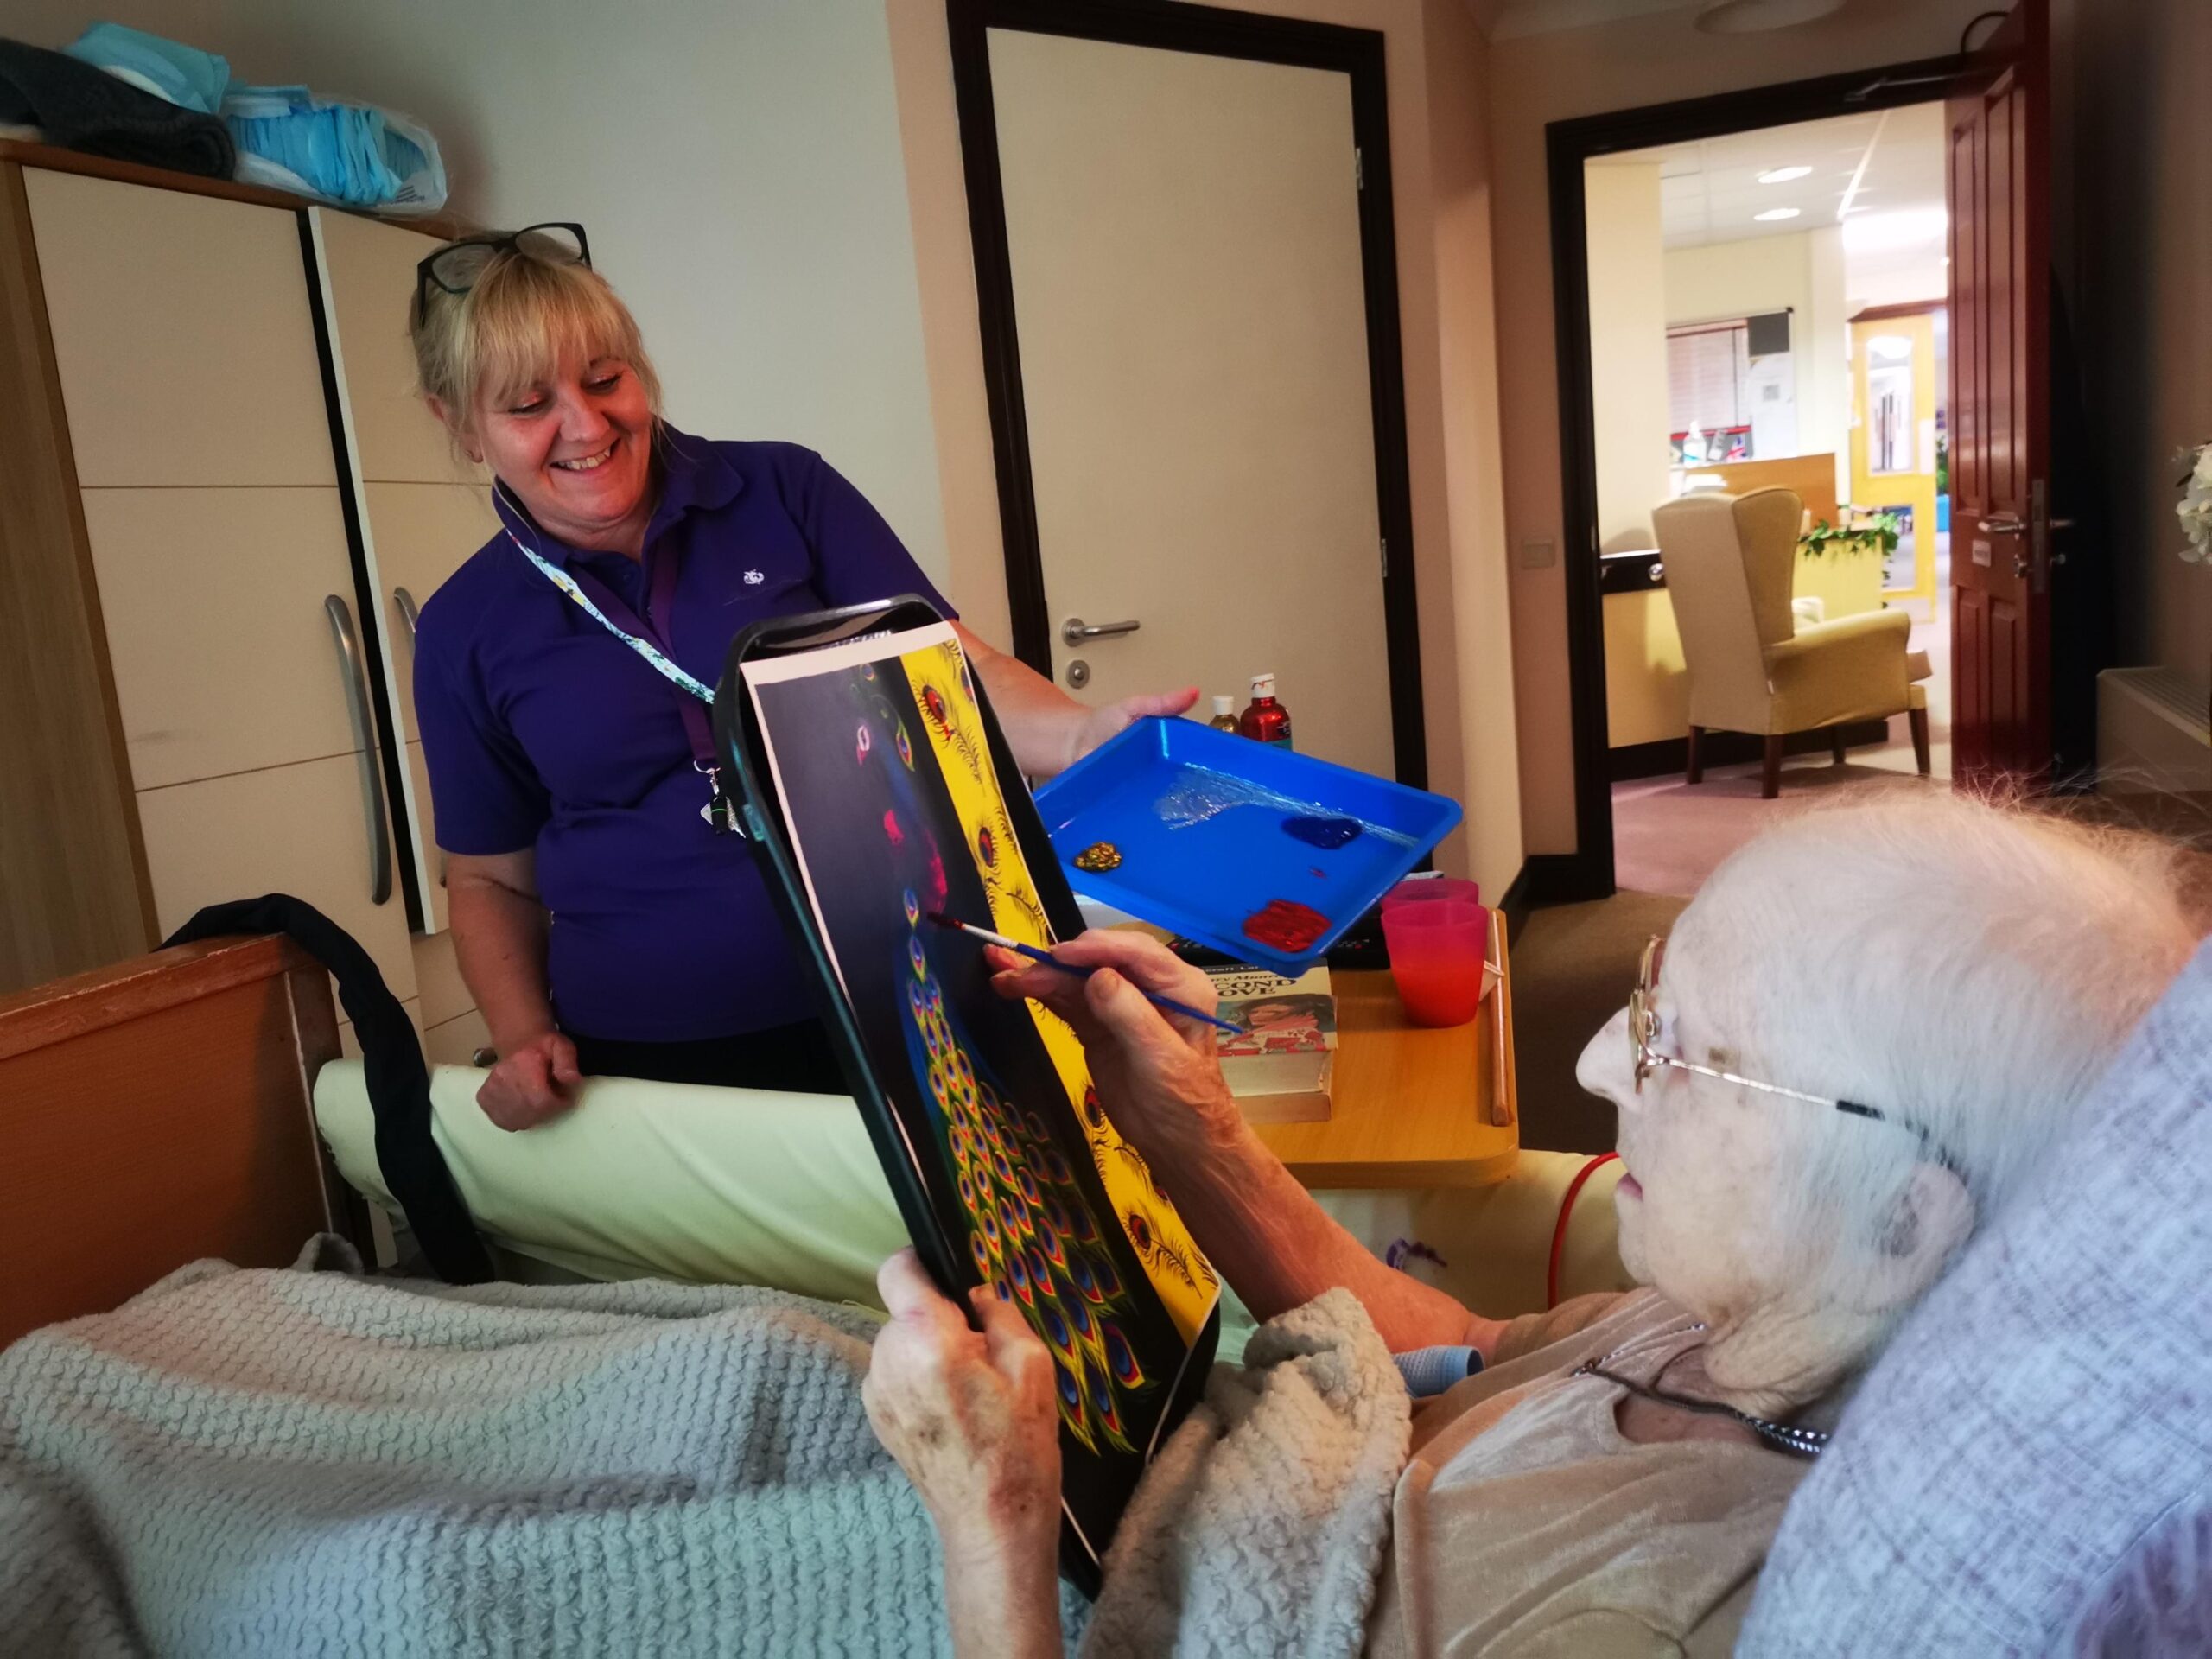 A female resident in bed painting with help of a female carer who is smiling.